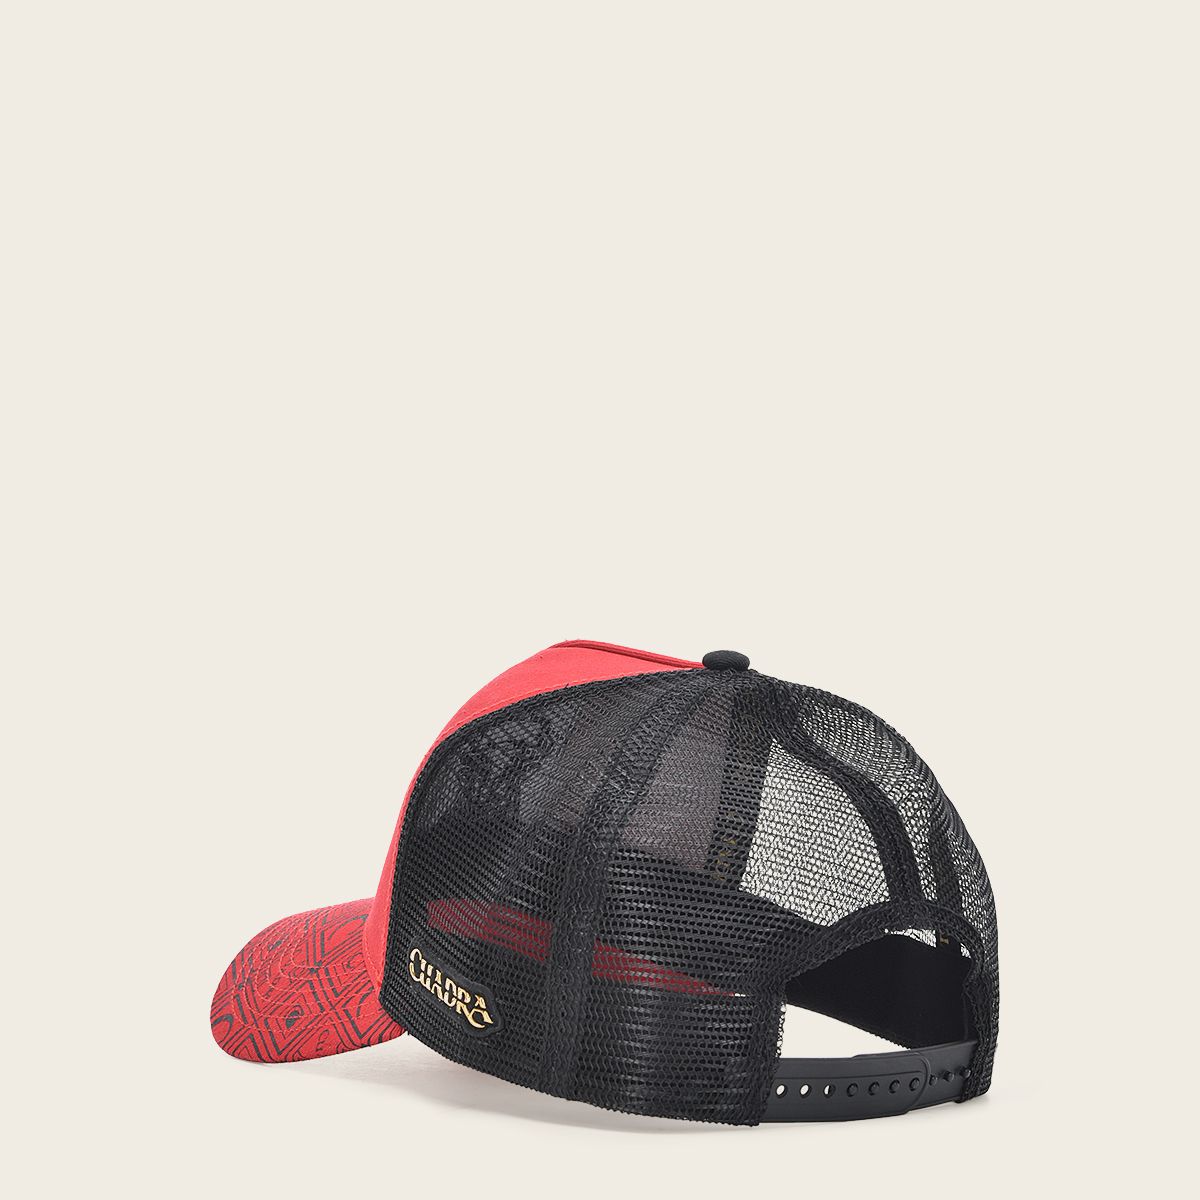 Cuadra red cap with embroidery bull patch